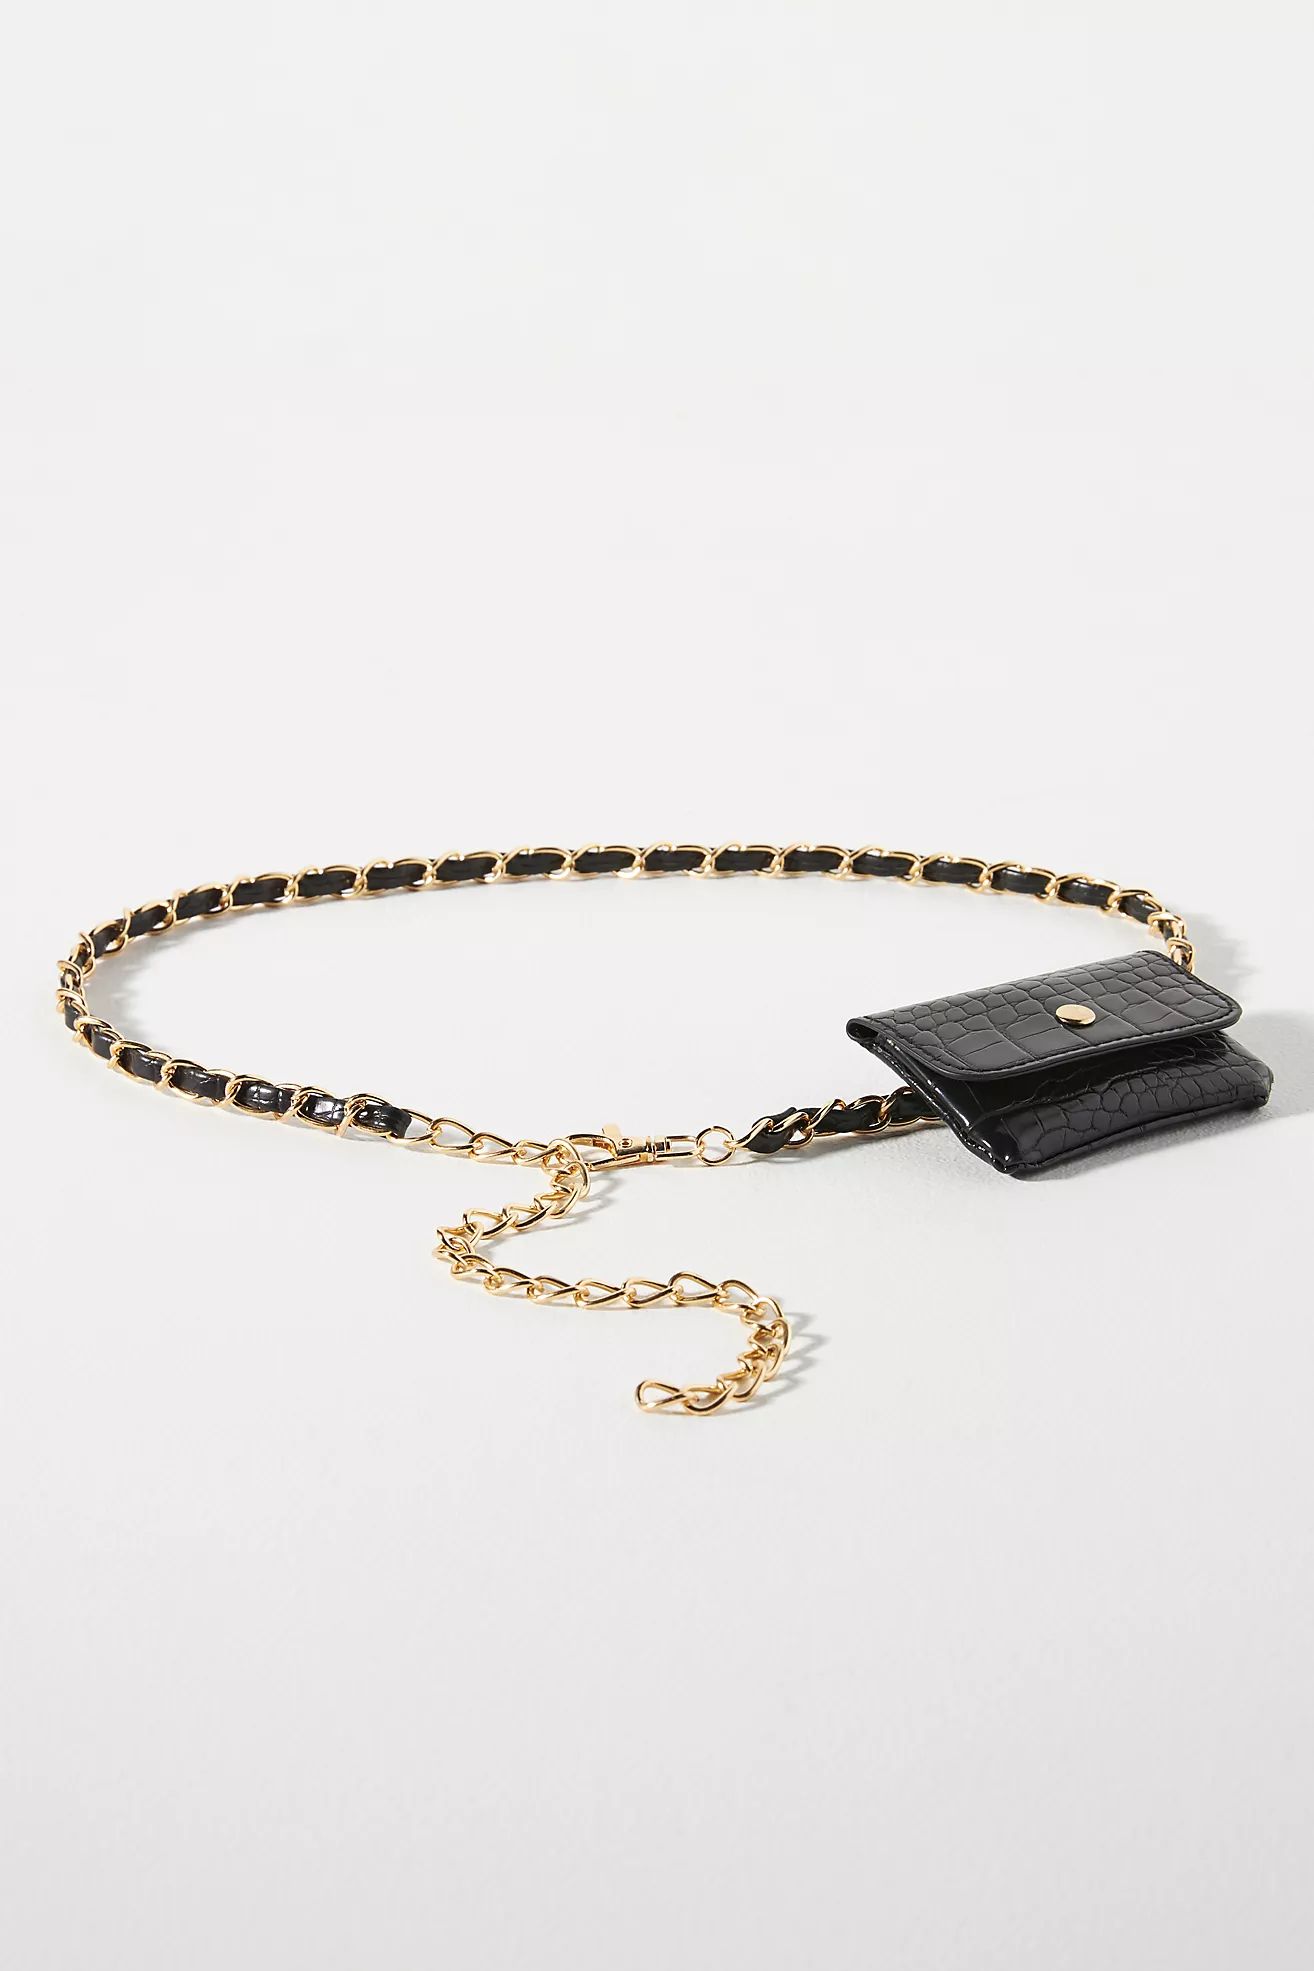 By Anthropologie Chain Coin Purse | Anthropologie (US)